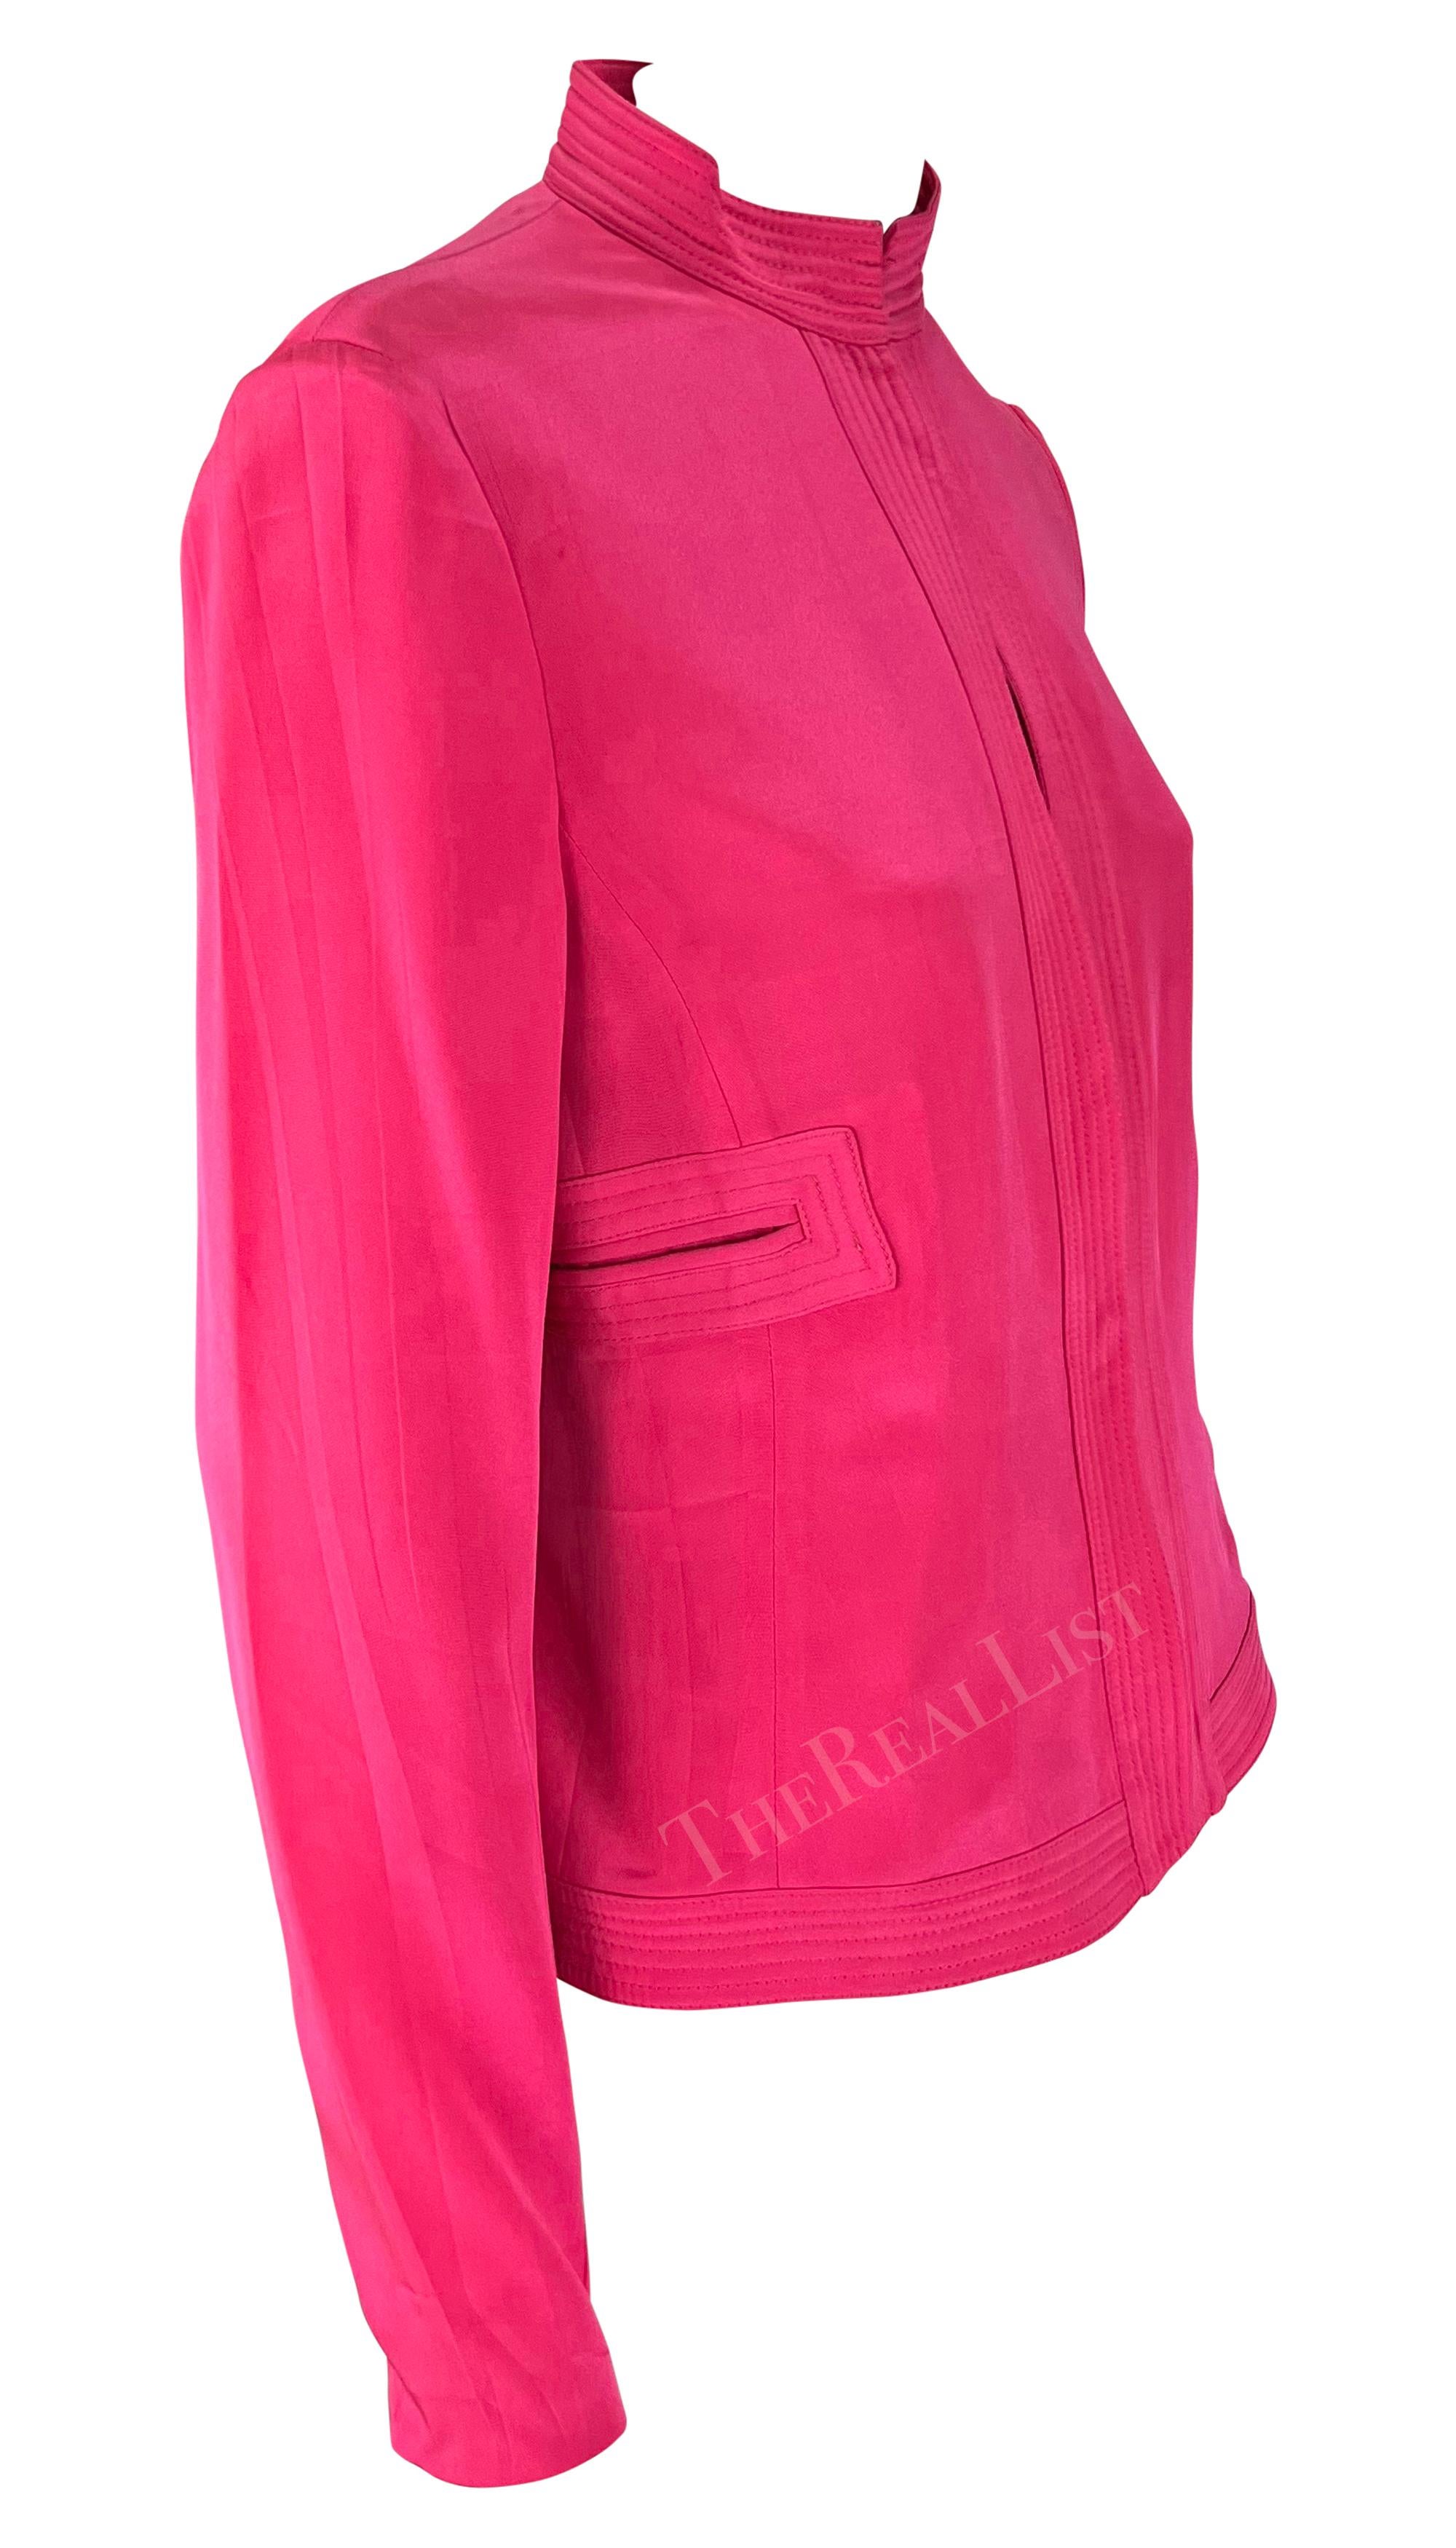 S/S 2003 Gianni Versace by Donatella Runway Hot Pink Long Sleeve Jacket  For Sale 3